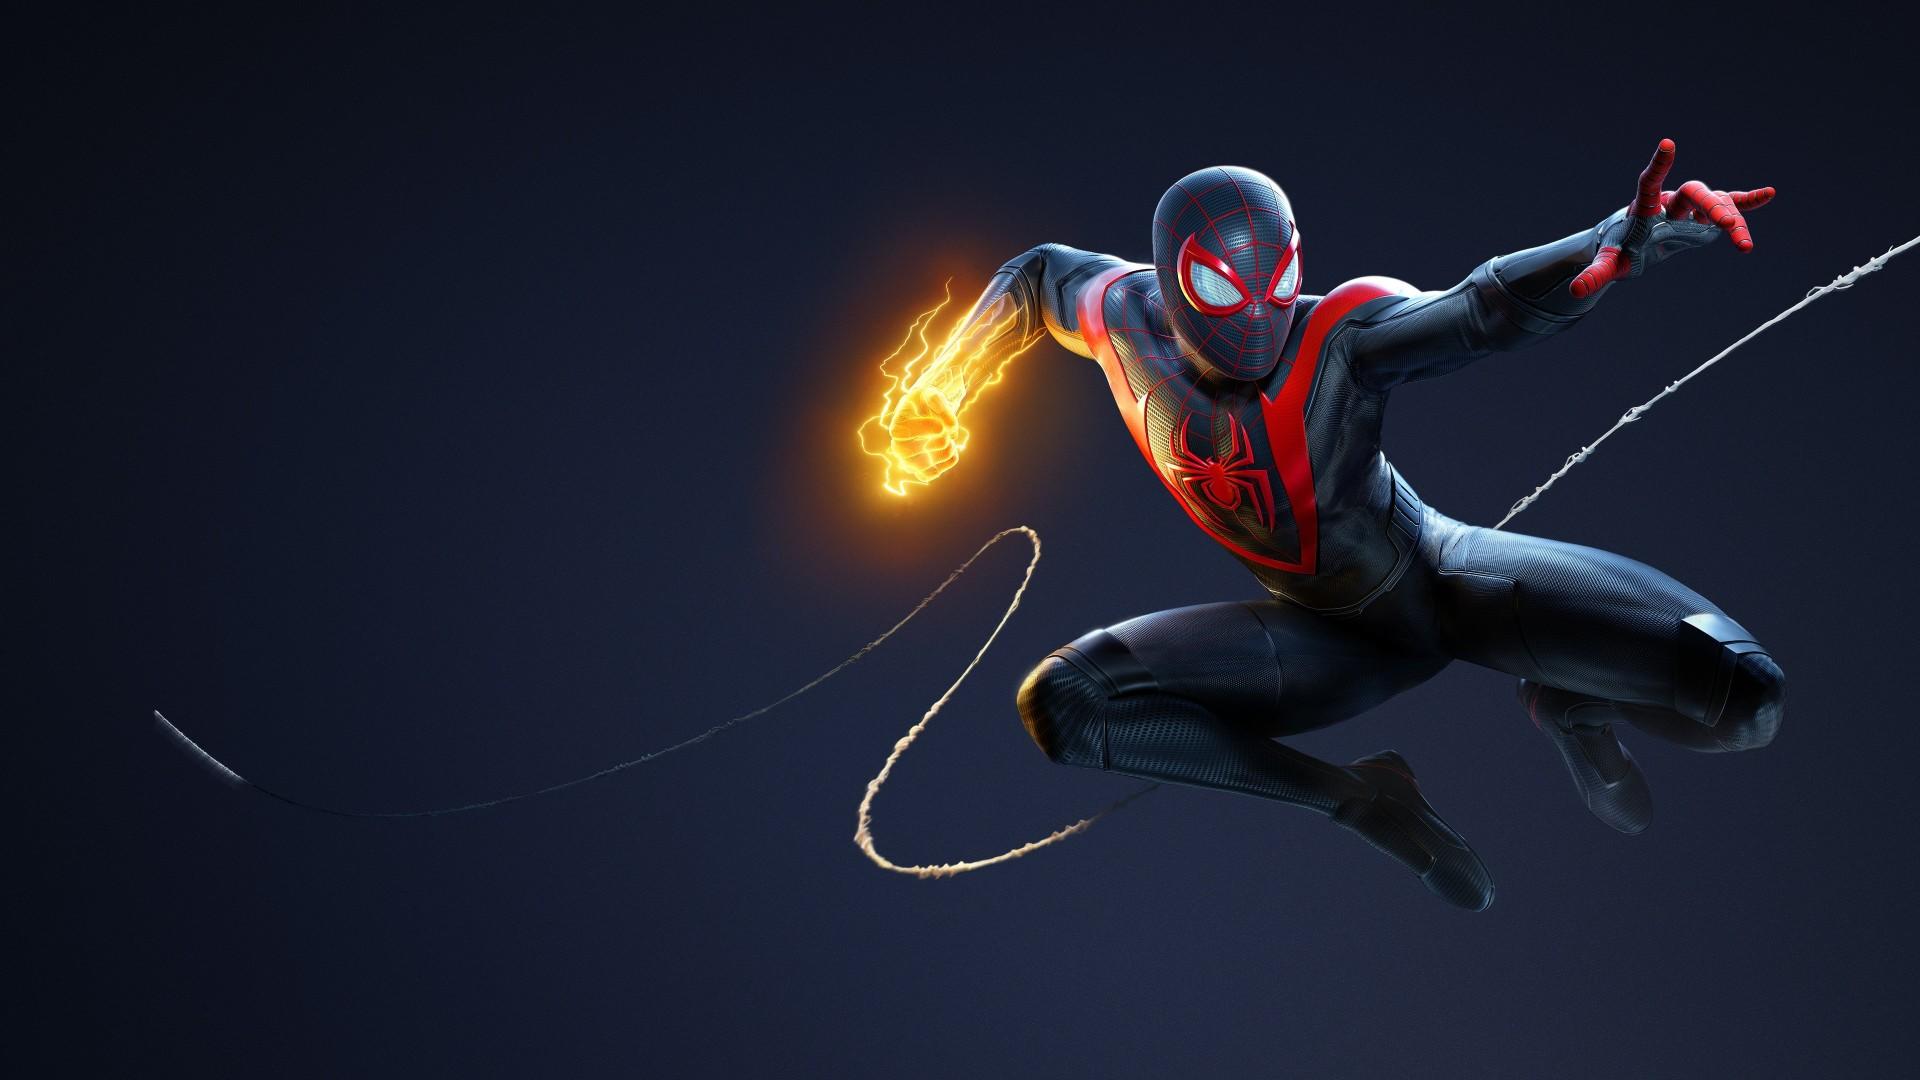 Spider-Man coming to PC means much more than just Spider-Man coming to PC